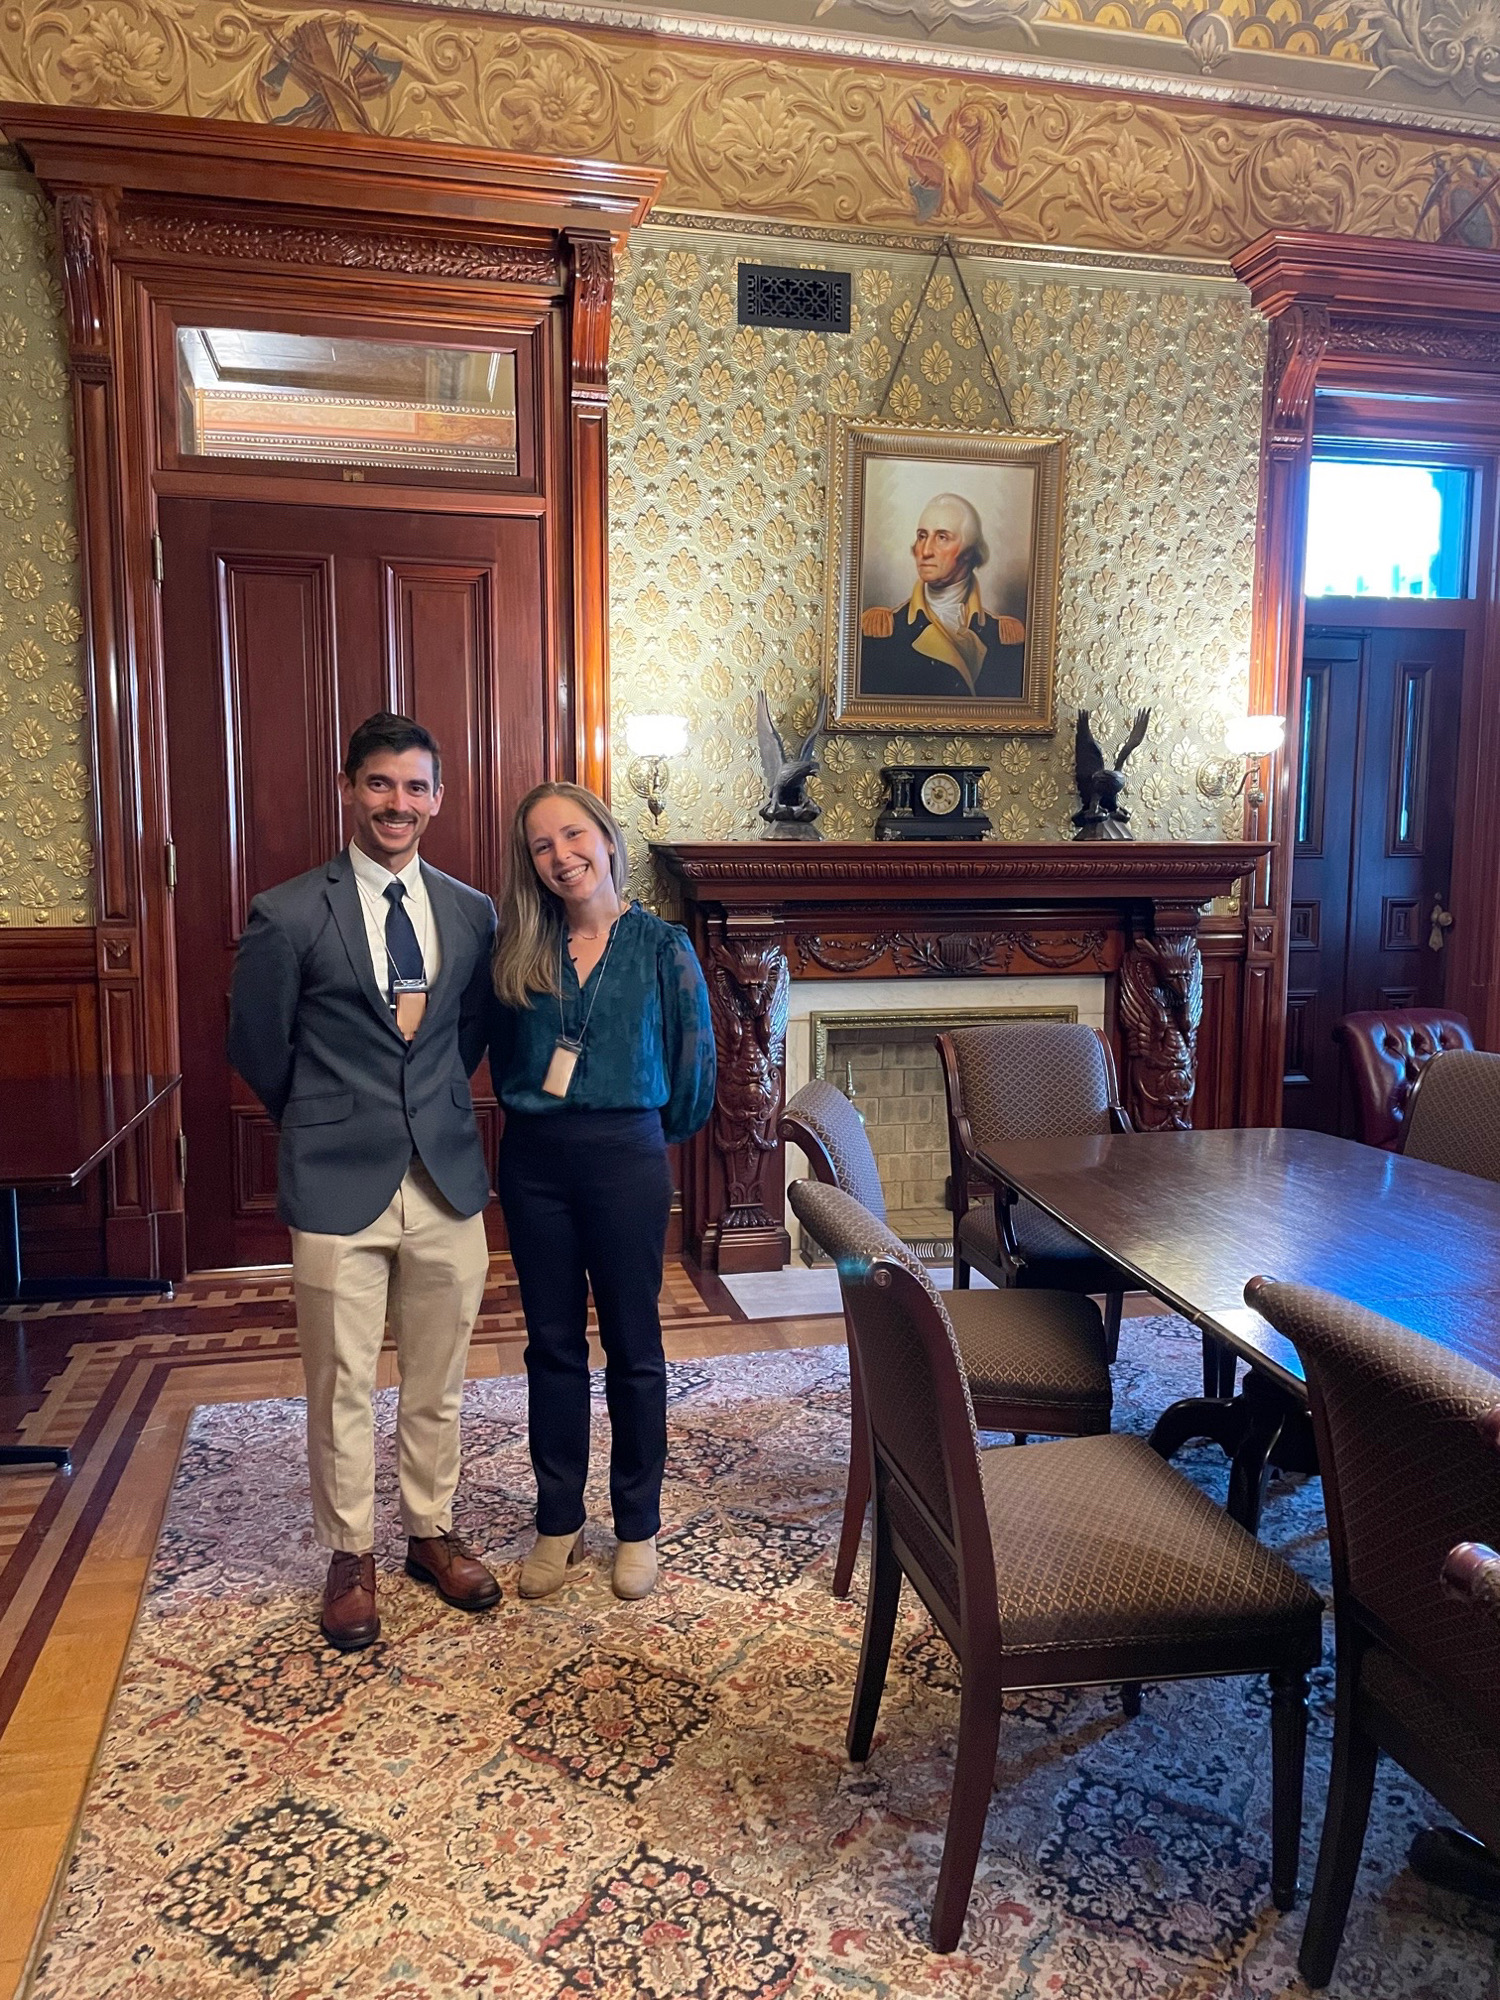 Two LBJ students in business attire stand smiling in a decorated White House room